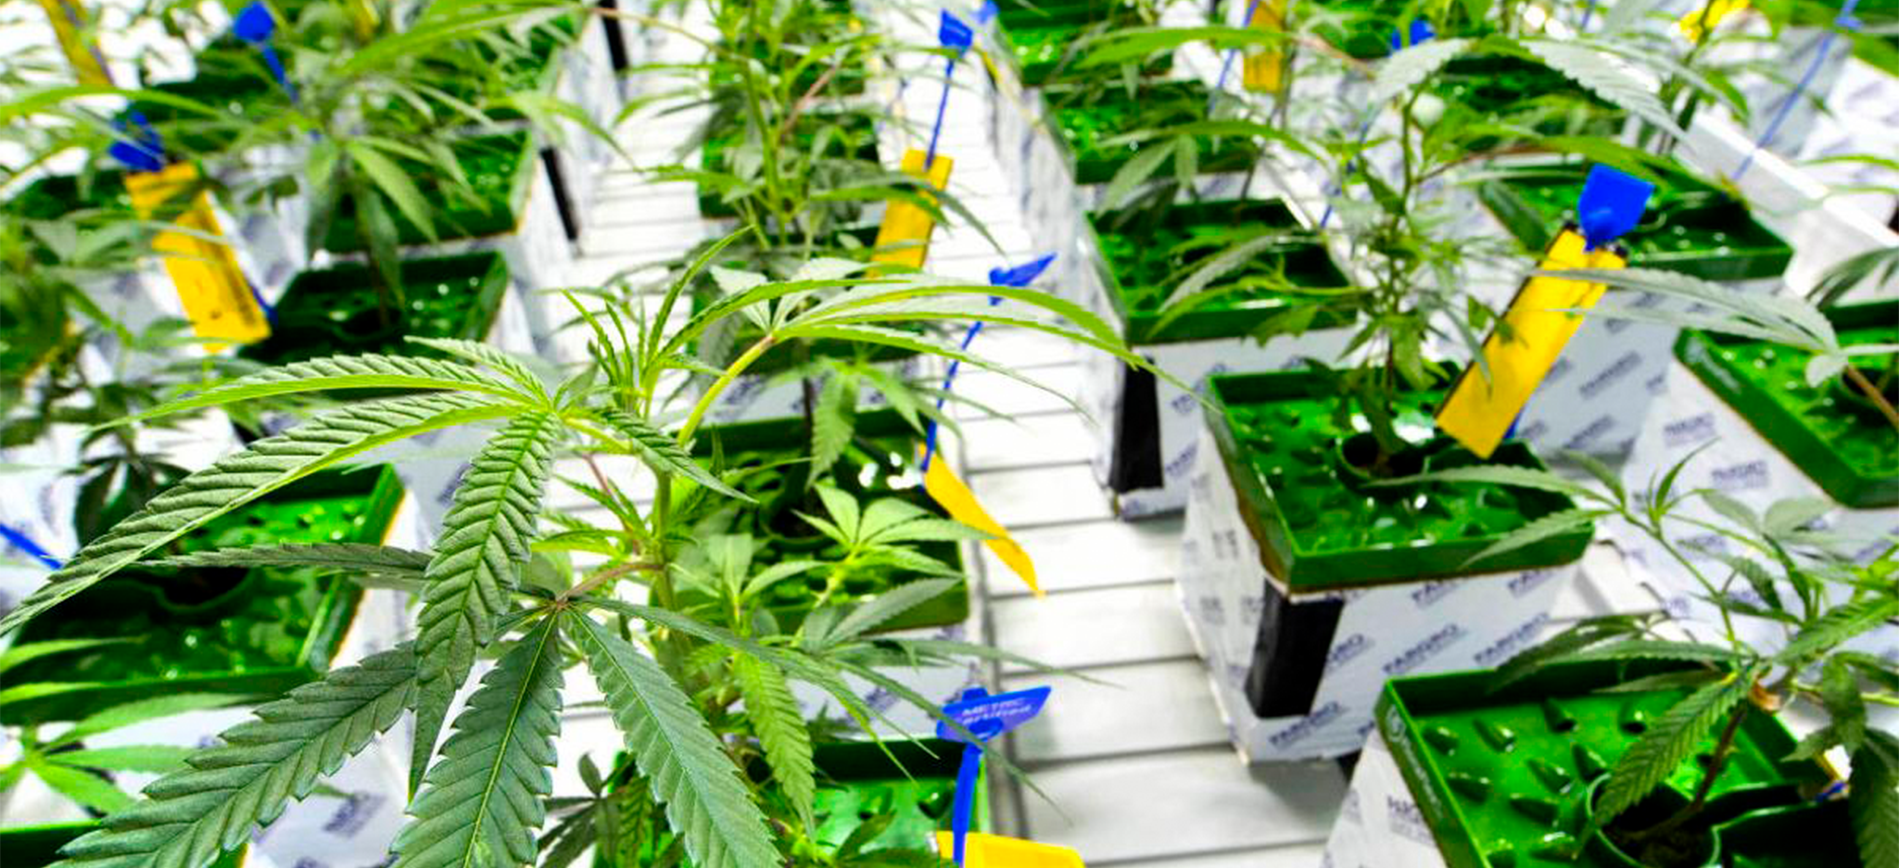 A group of young cannabis plants with yellow METRC tags to track seed-to-sale activities